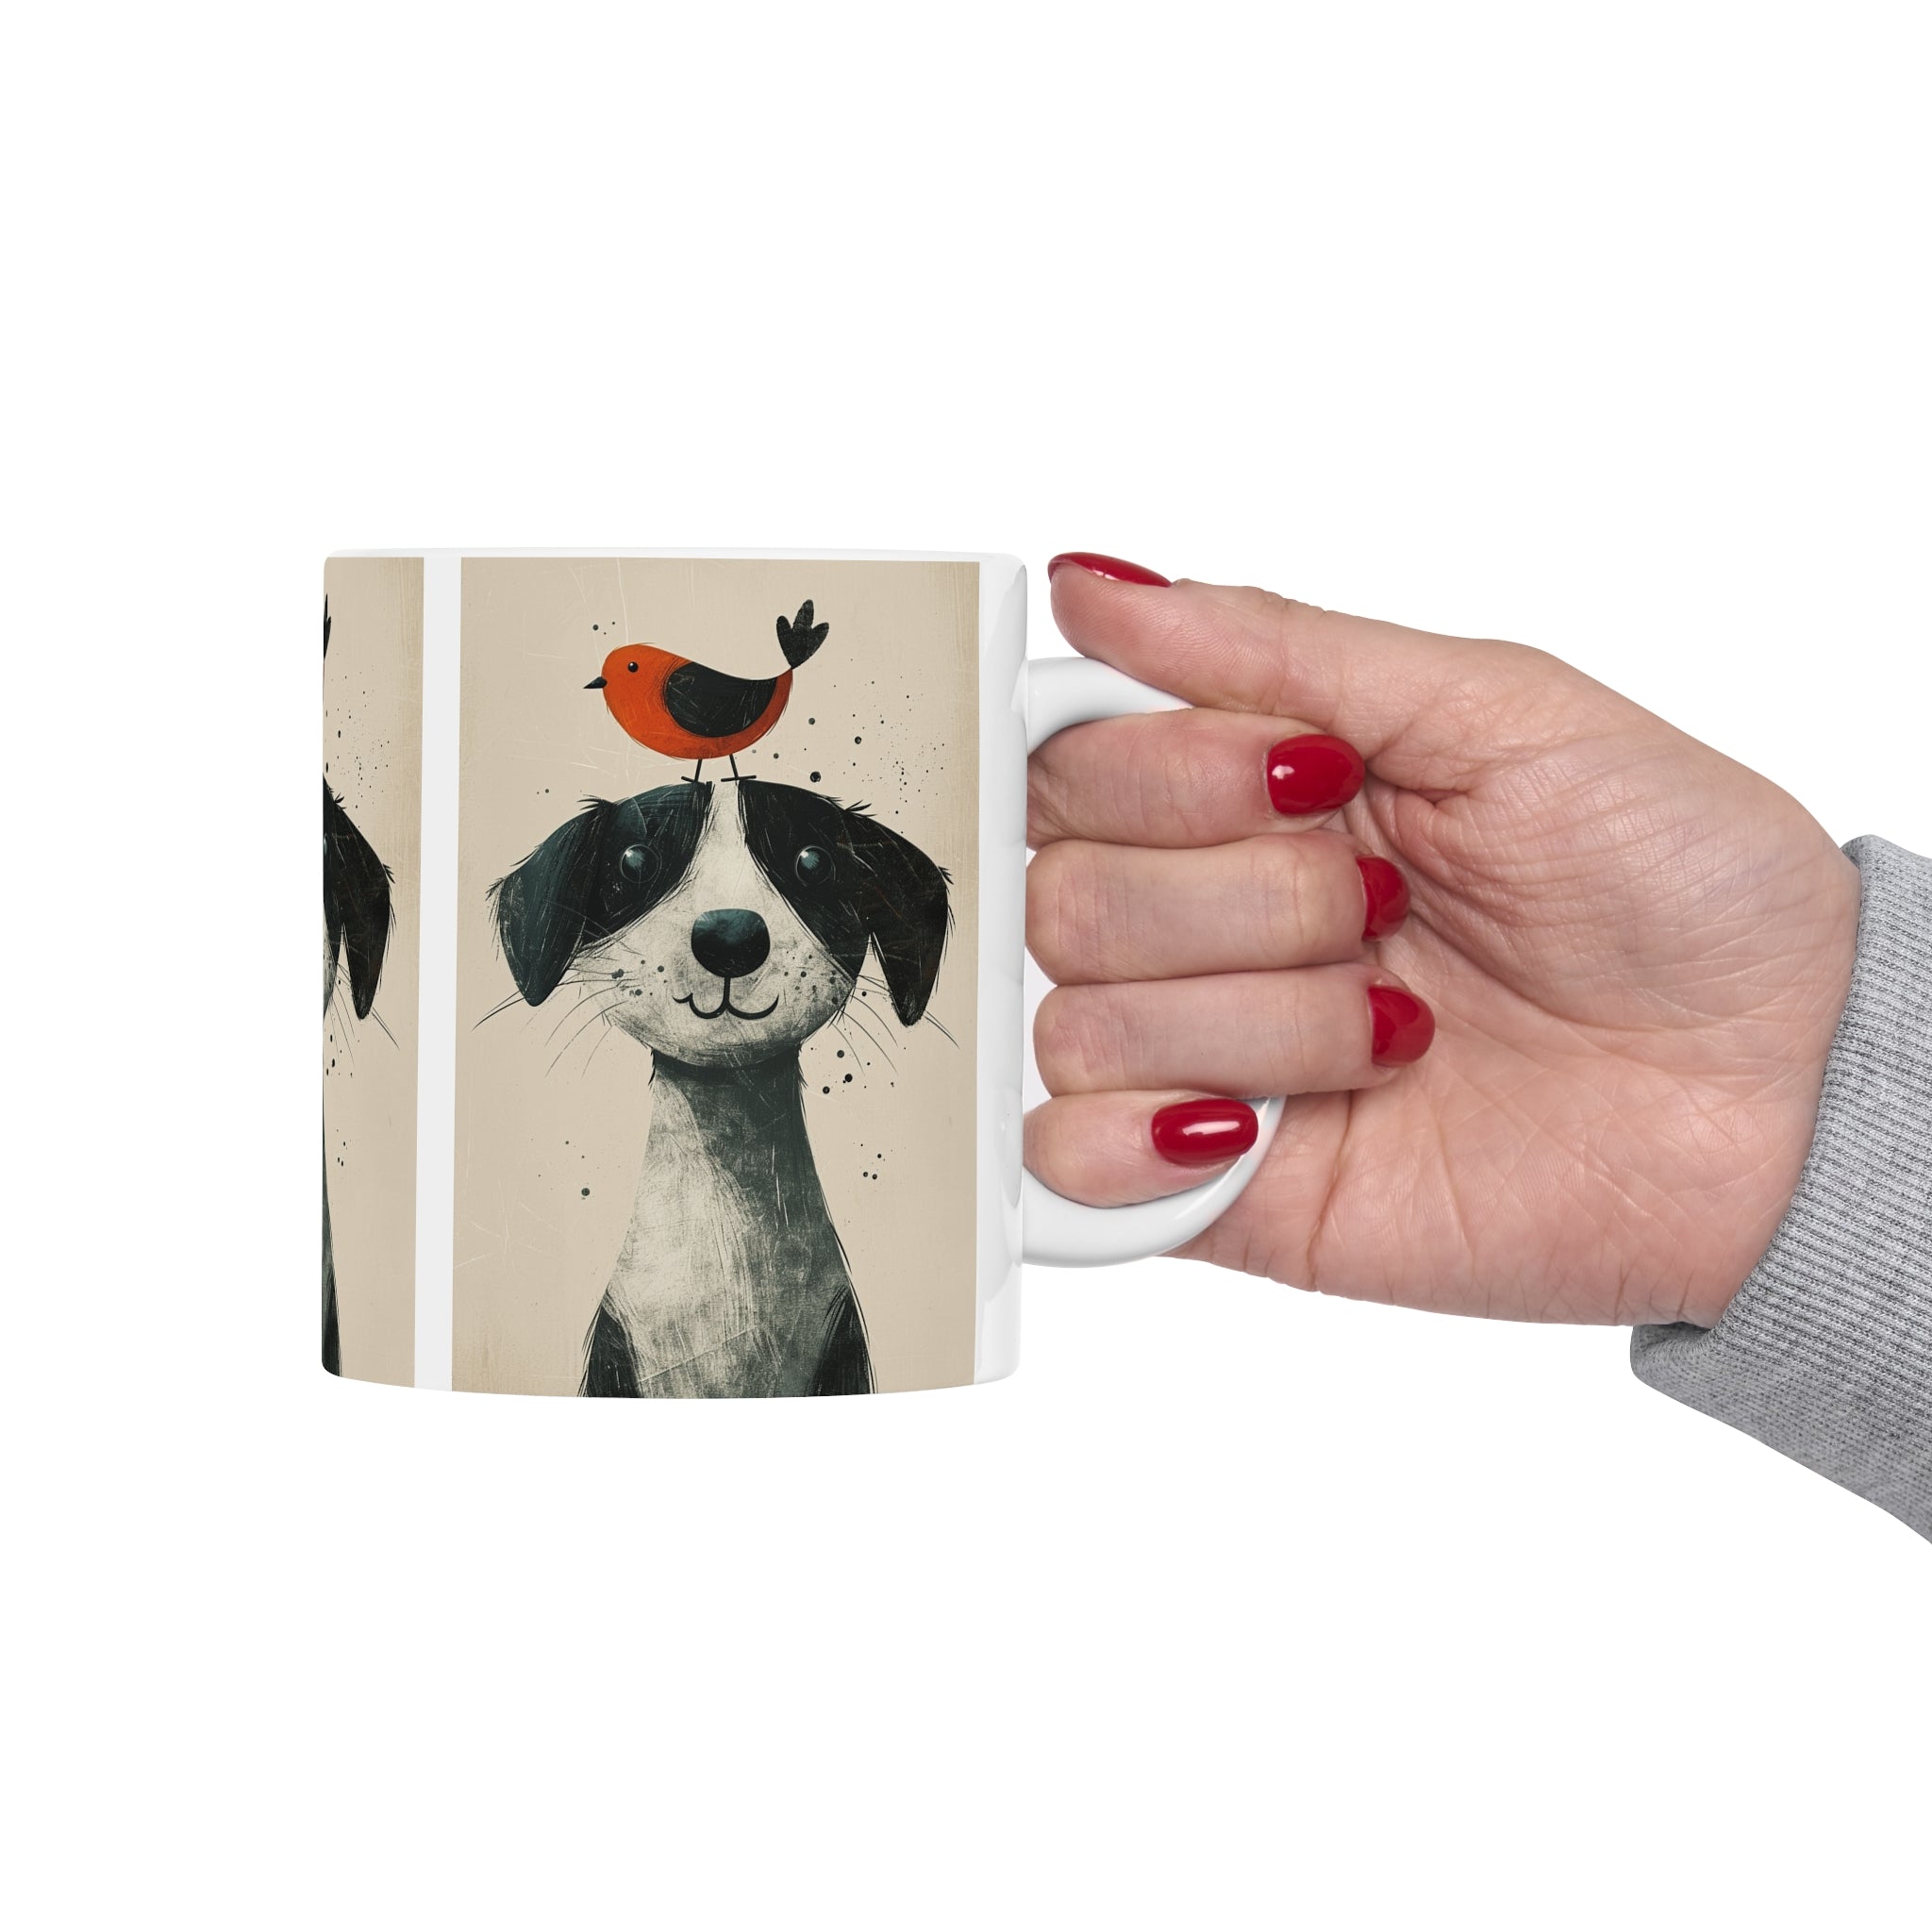 Coffee Drinkers and Dog Lovers Happy Dog with Friendly Birddie Ceramic Mug 11oz - Cute Animal Friendship Coffee Cup for Relaxing Mornings and Tea Afternoon Bliss